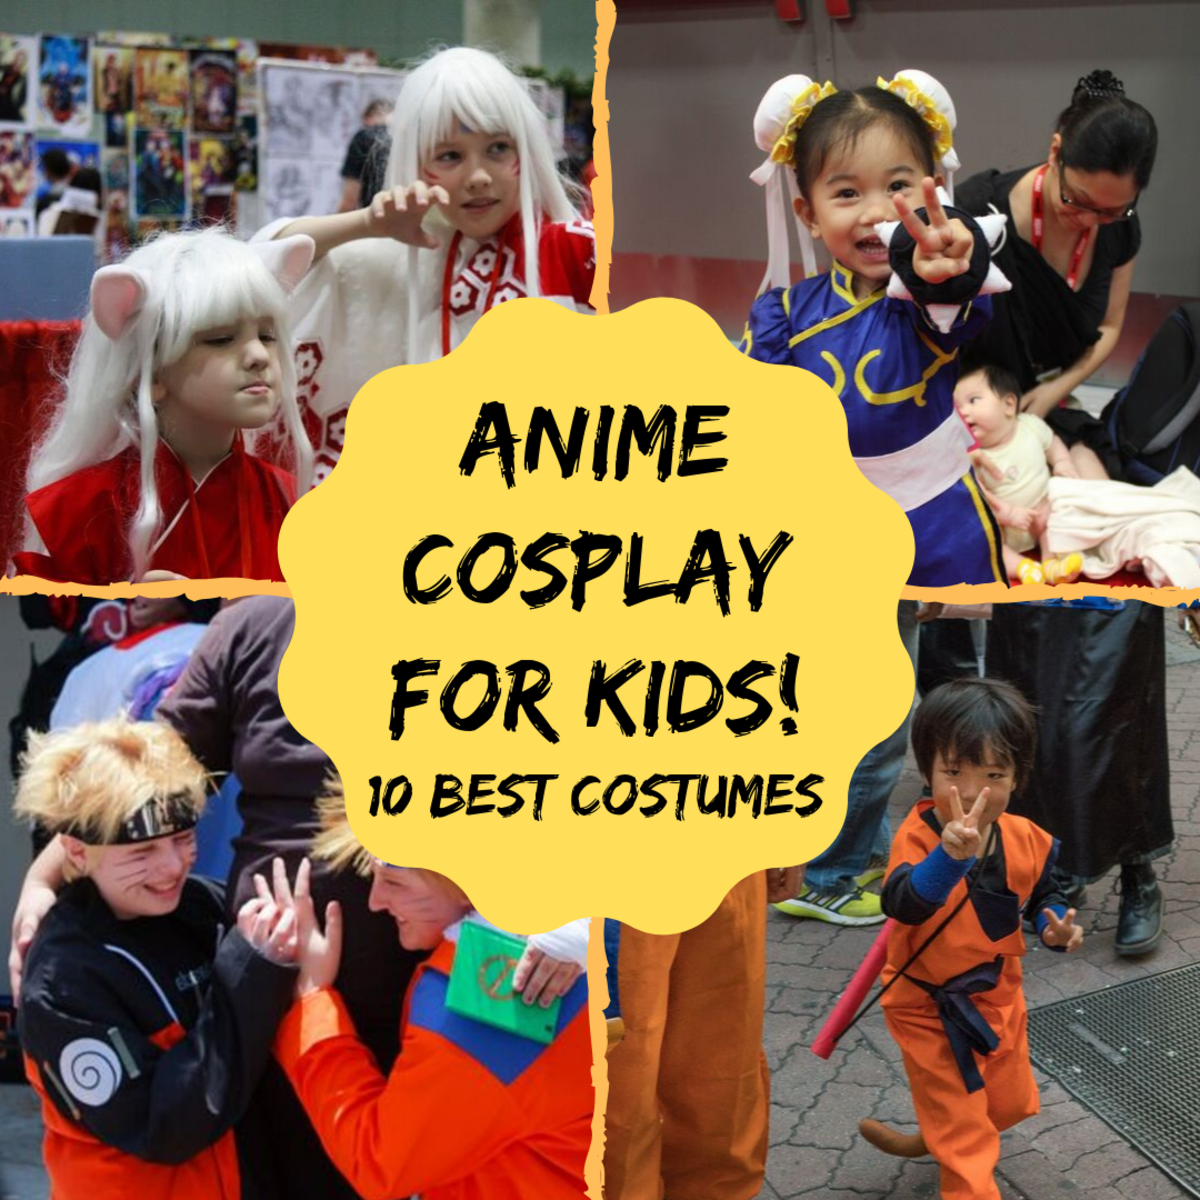 Check out some of the best cosplay ideas for kids who love anime! (From the top left, going clockwise: Inuyasha, Chun Li, Gohan or Goku, and Naruto.)